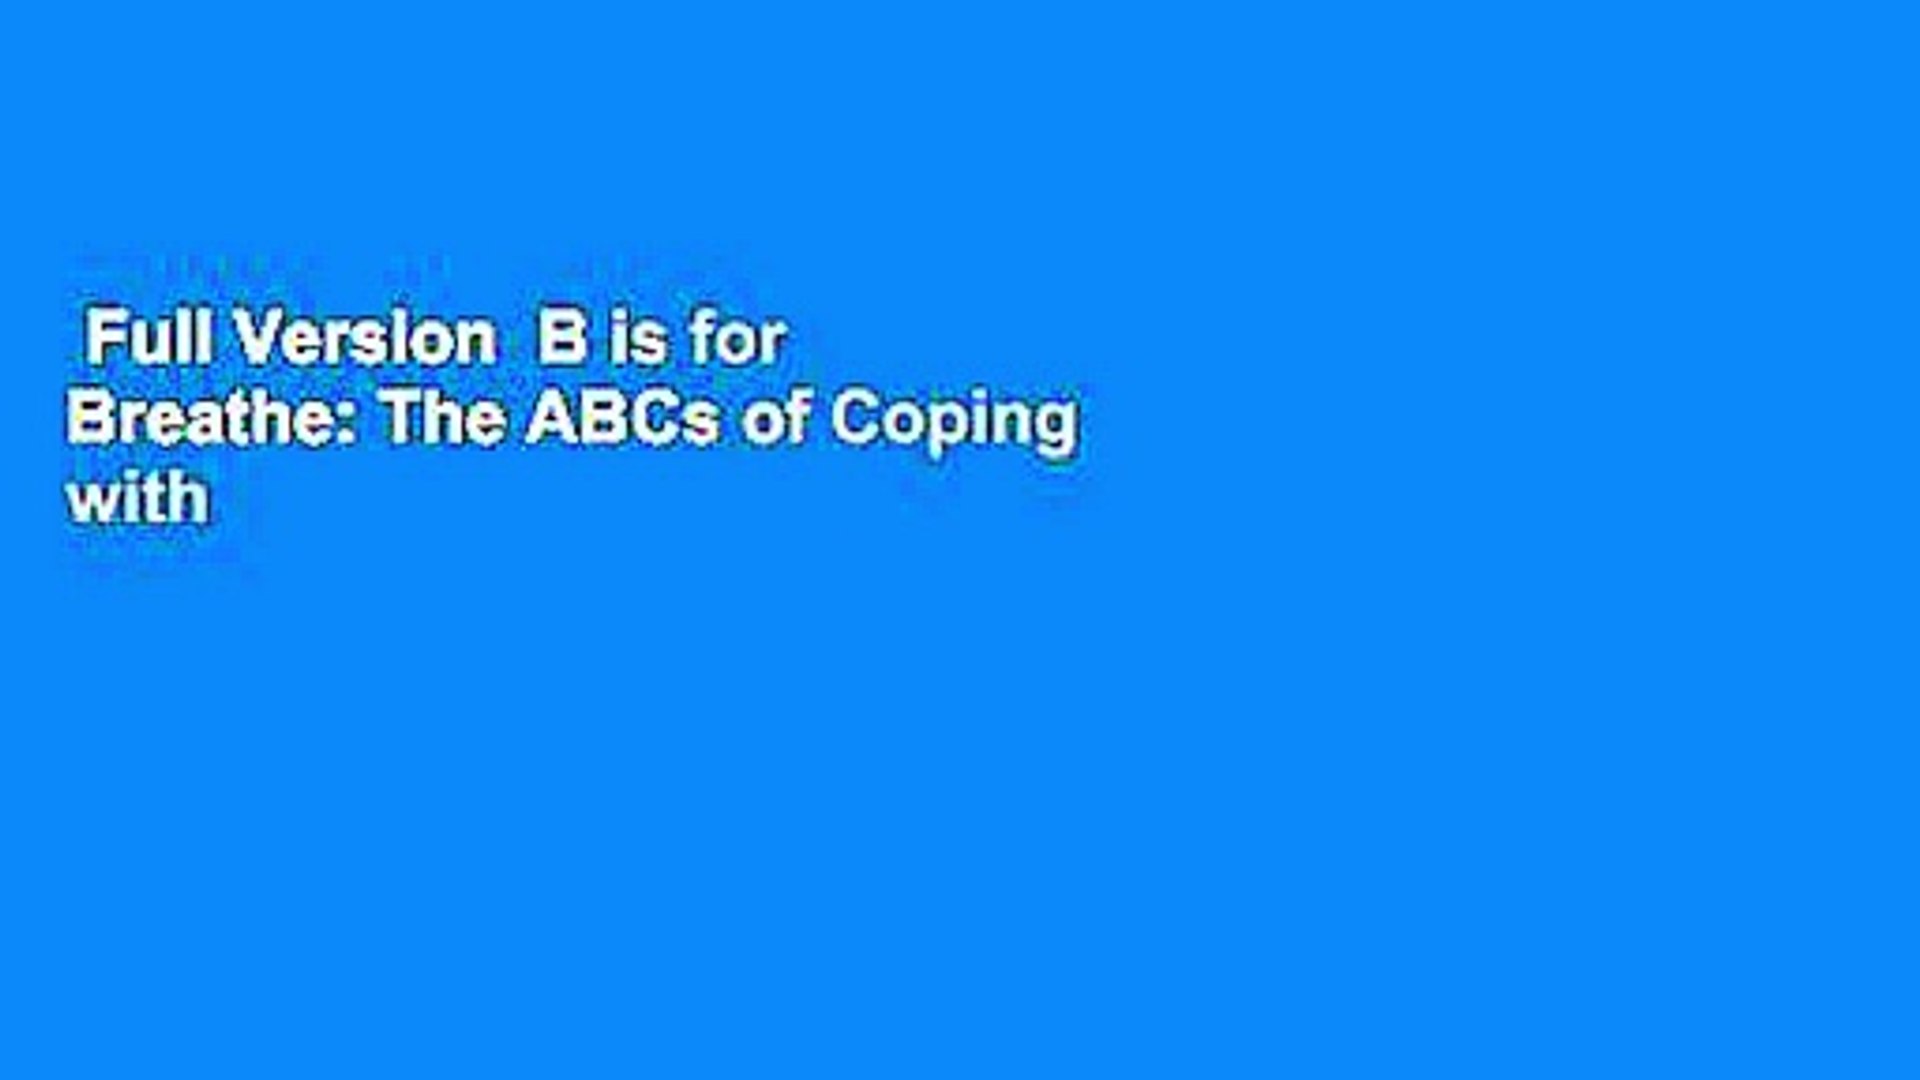 B is for Breathe The ABCs of Coping with Fussy and Frustrating Feelings 